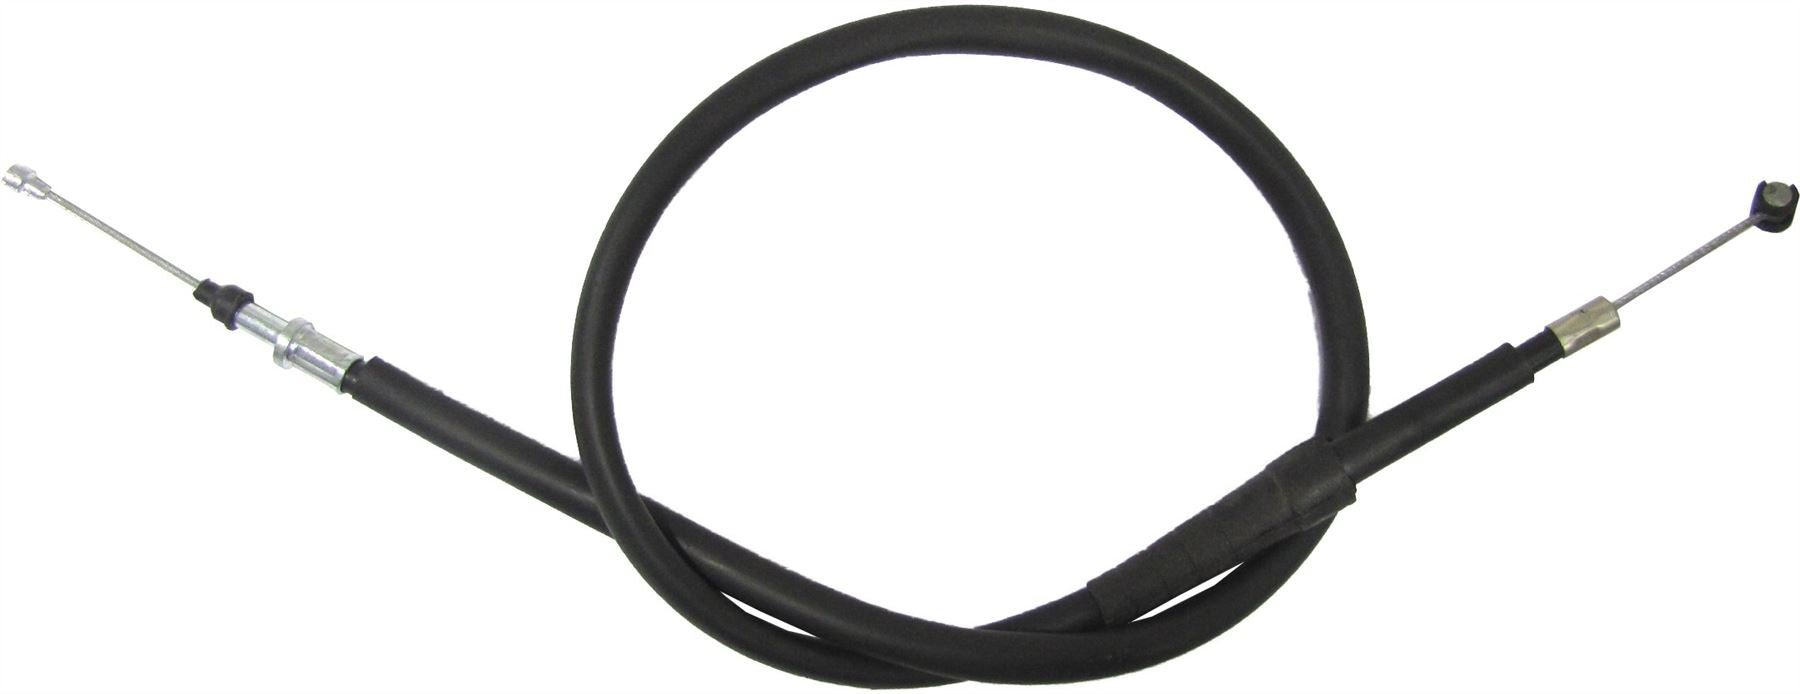 Clutch Cable Fits Yamaha RD 250 1973-1983